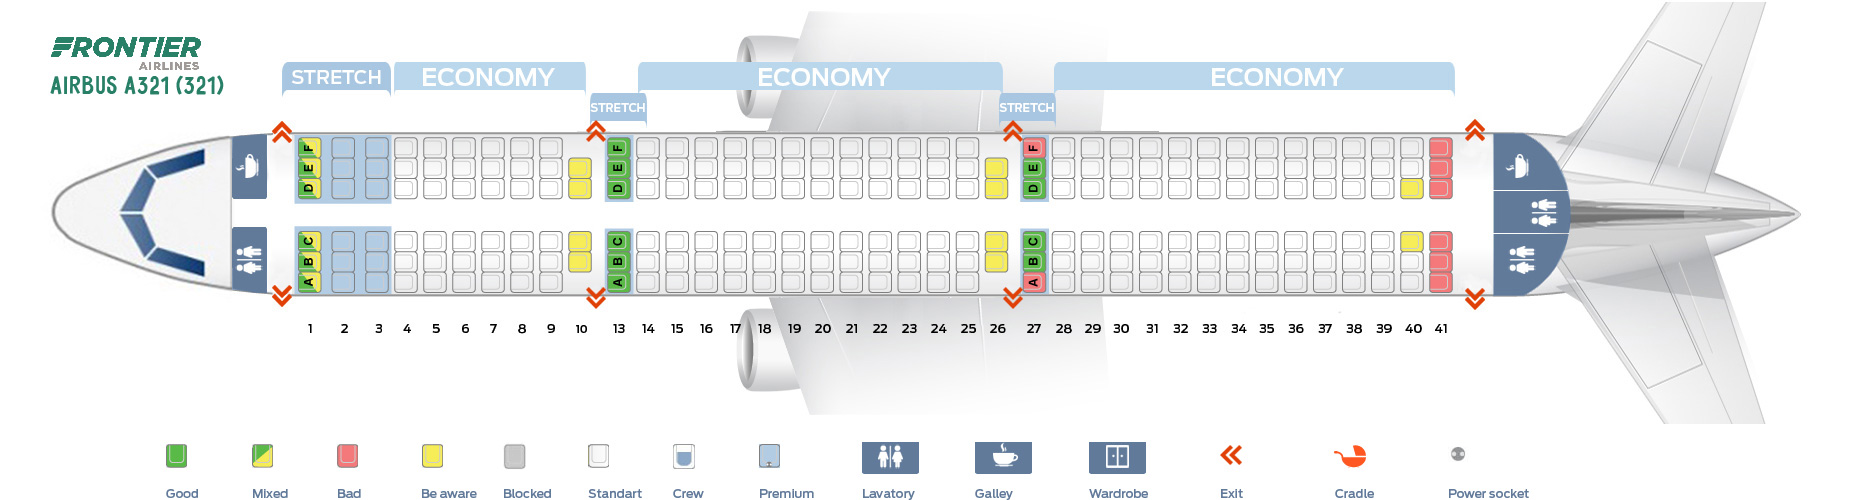 Seat Map and Seating Chart Frontier Airlines Airbus A321 200 321